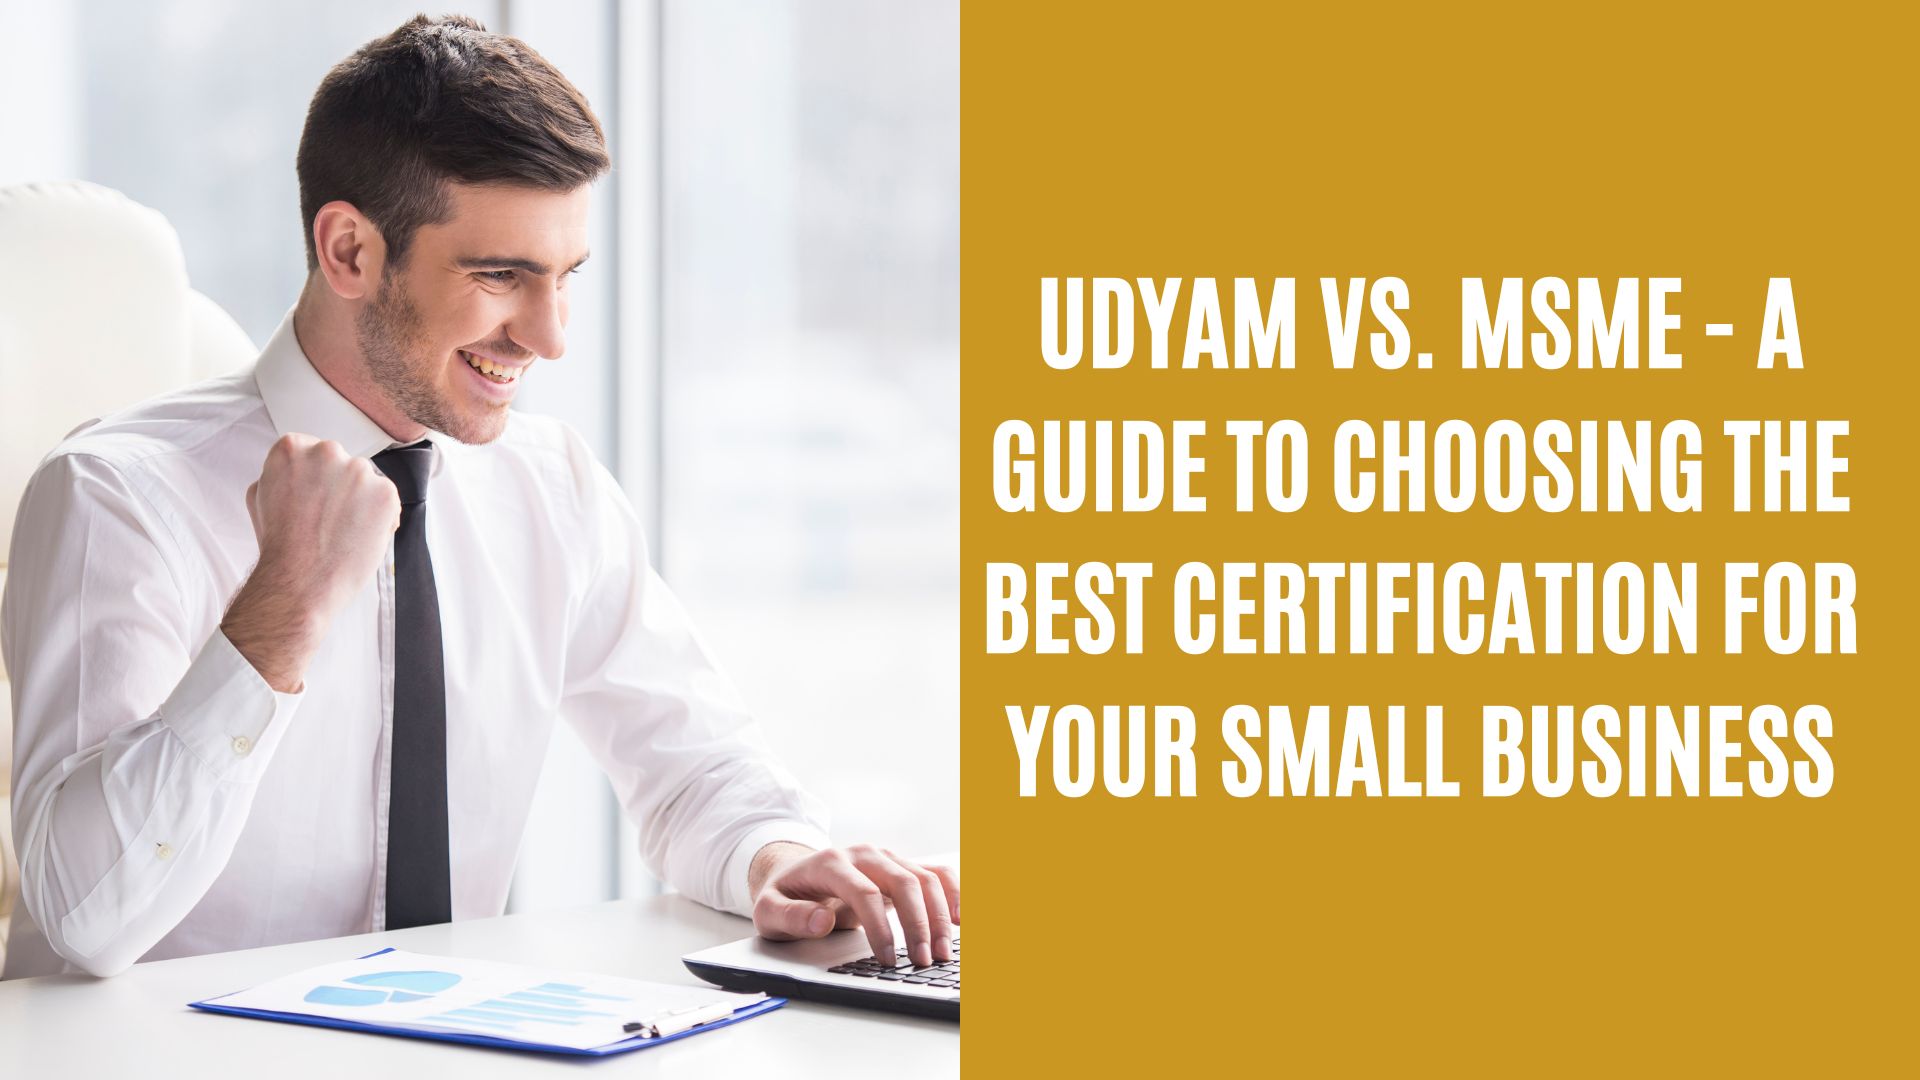 Udyam vs. MSME – A Guide to Choosing the Best Certification for Your Small Business